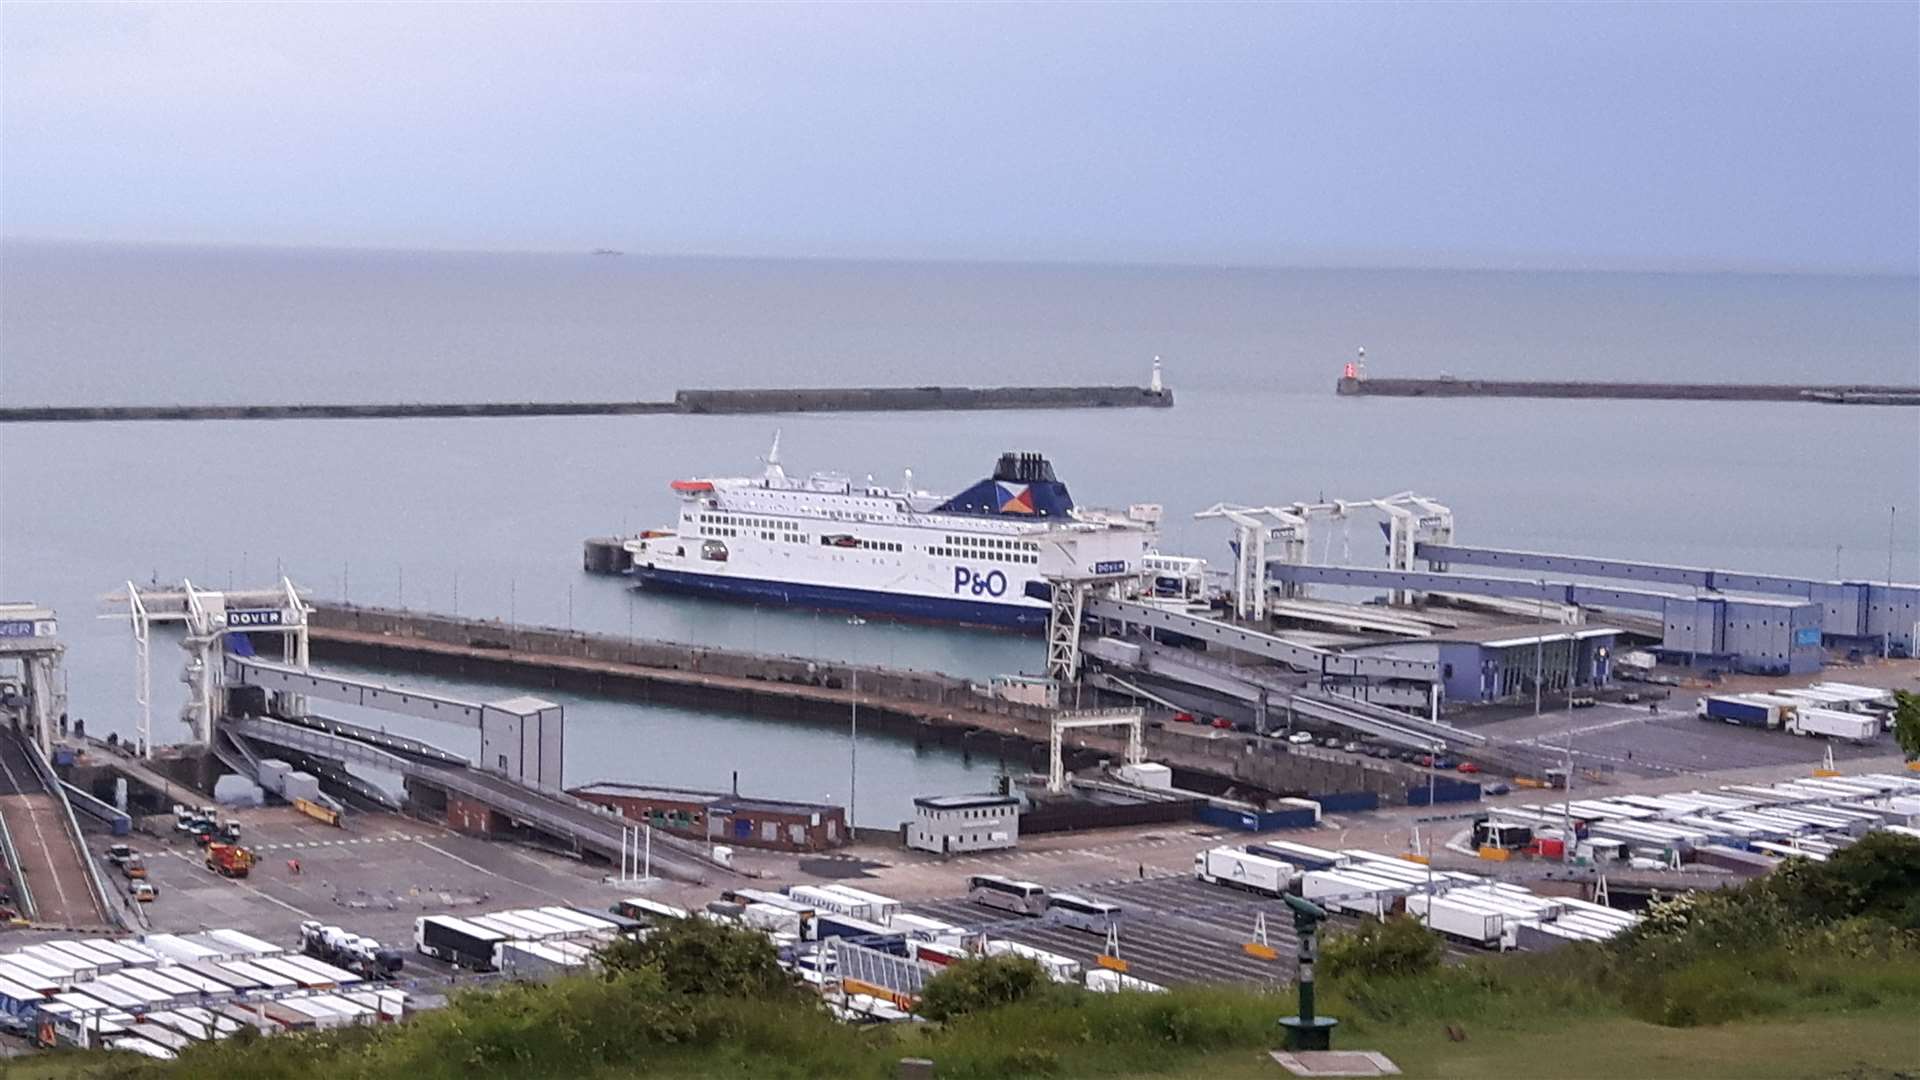 P&O ferries at Dover Eastern Docks (35521379)